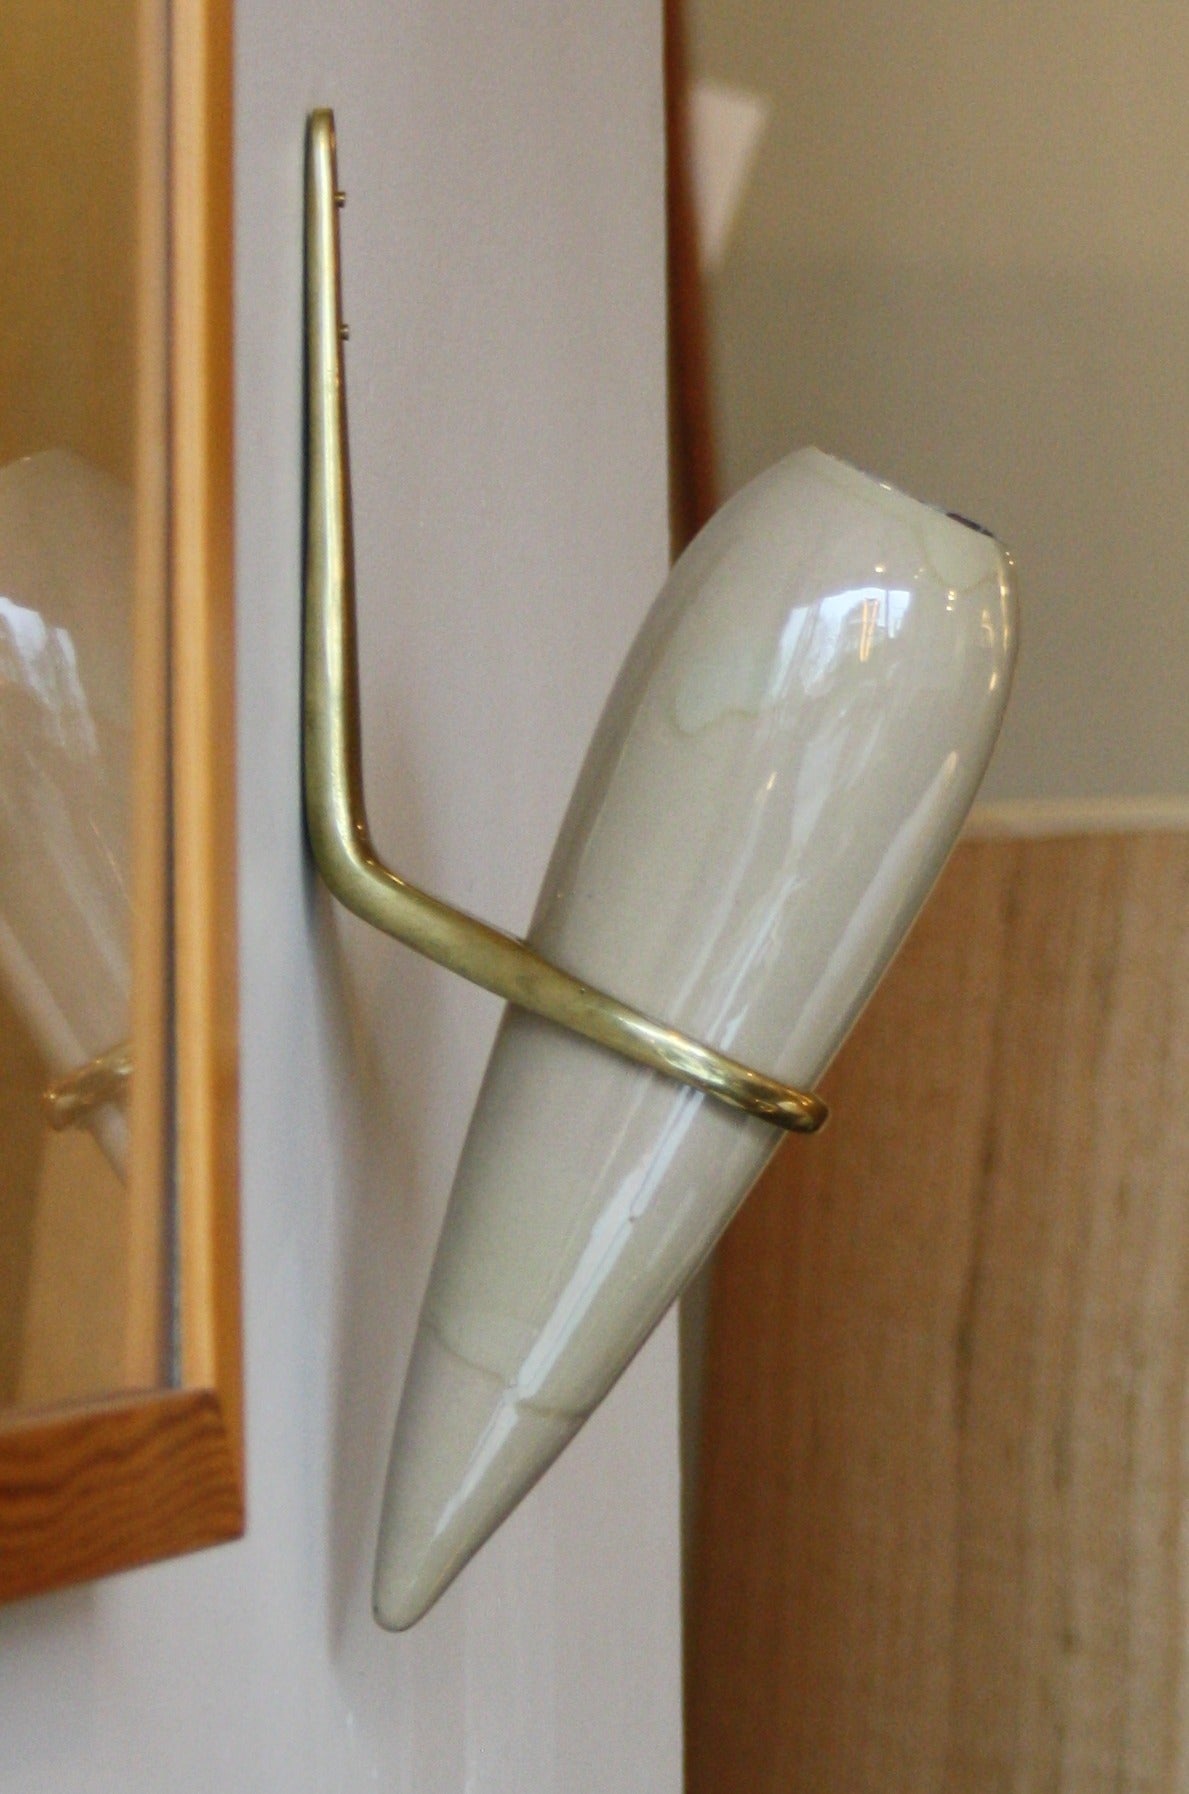 Sculptural vase mounted to the wall with a brass mount. Made by Carl Auböck and Conrad Seidler.